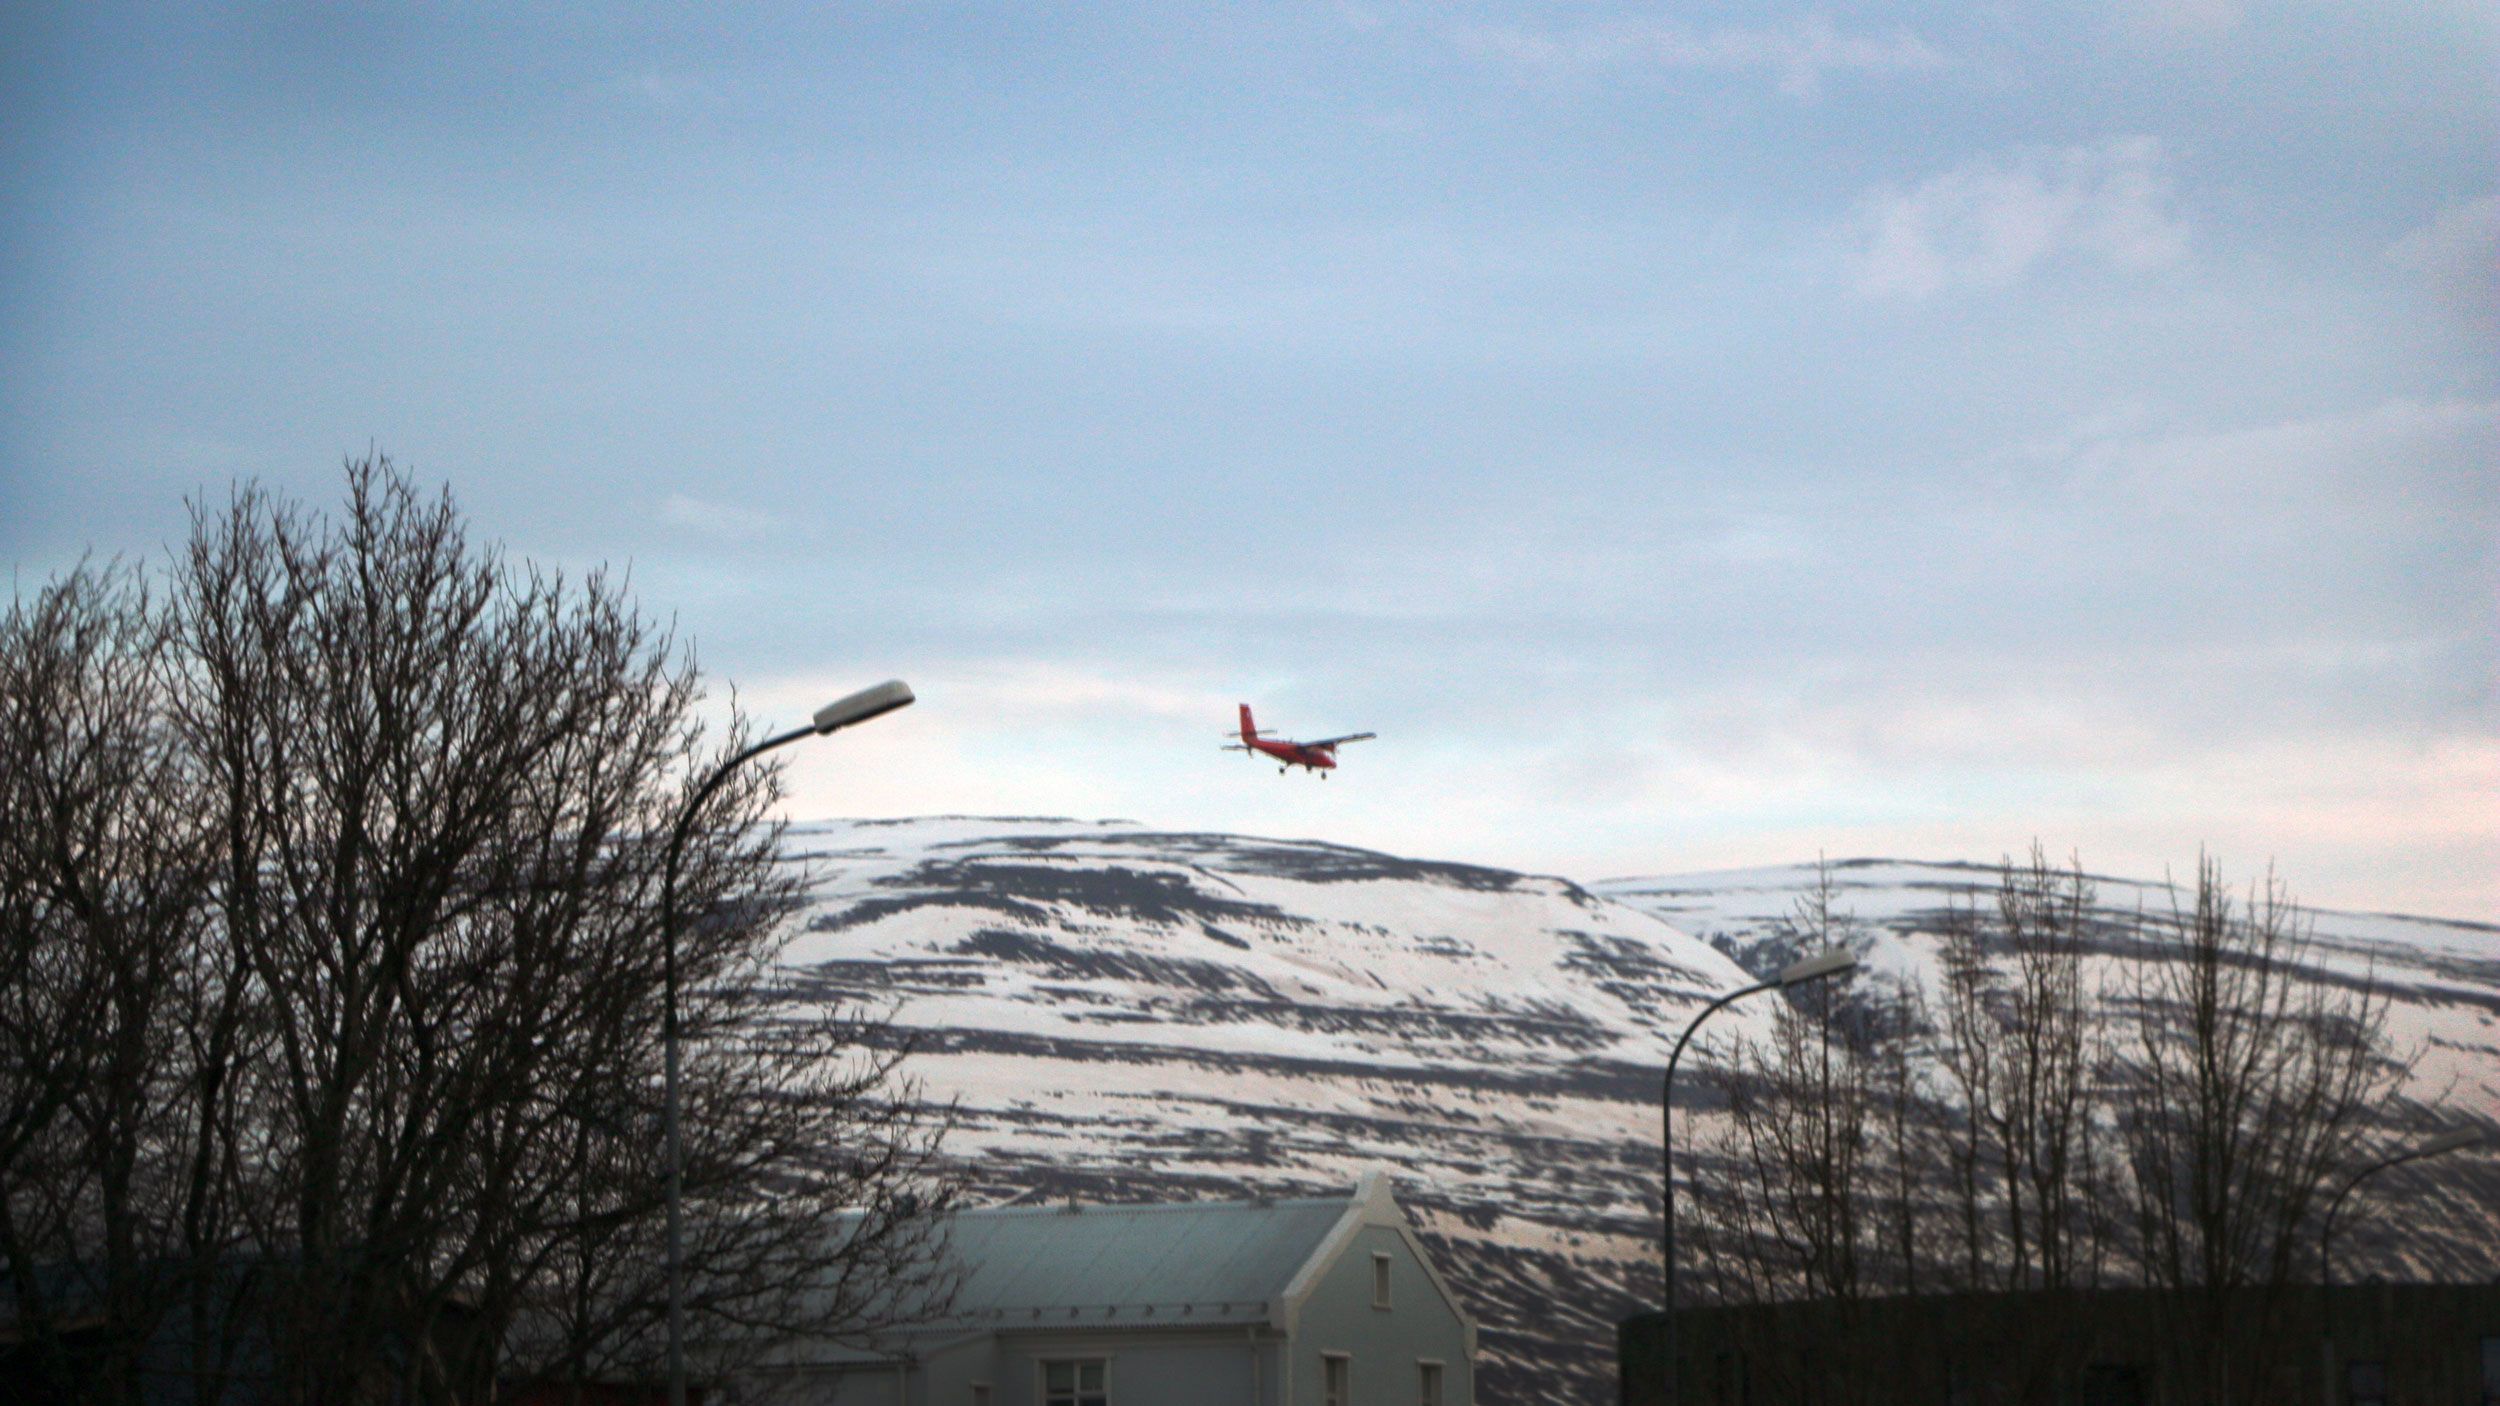 The Twin Otter aircraft above the Akureyri airport. Image by Ari Daniel. Iceland, 2018.